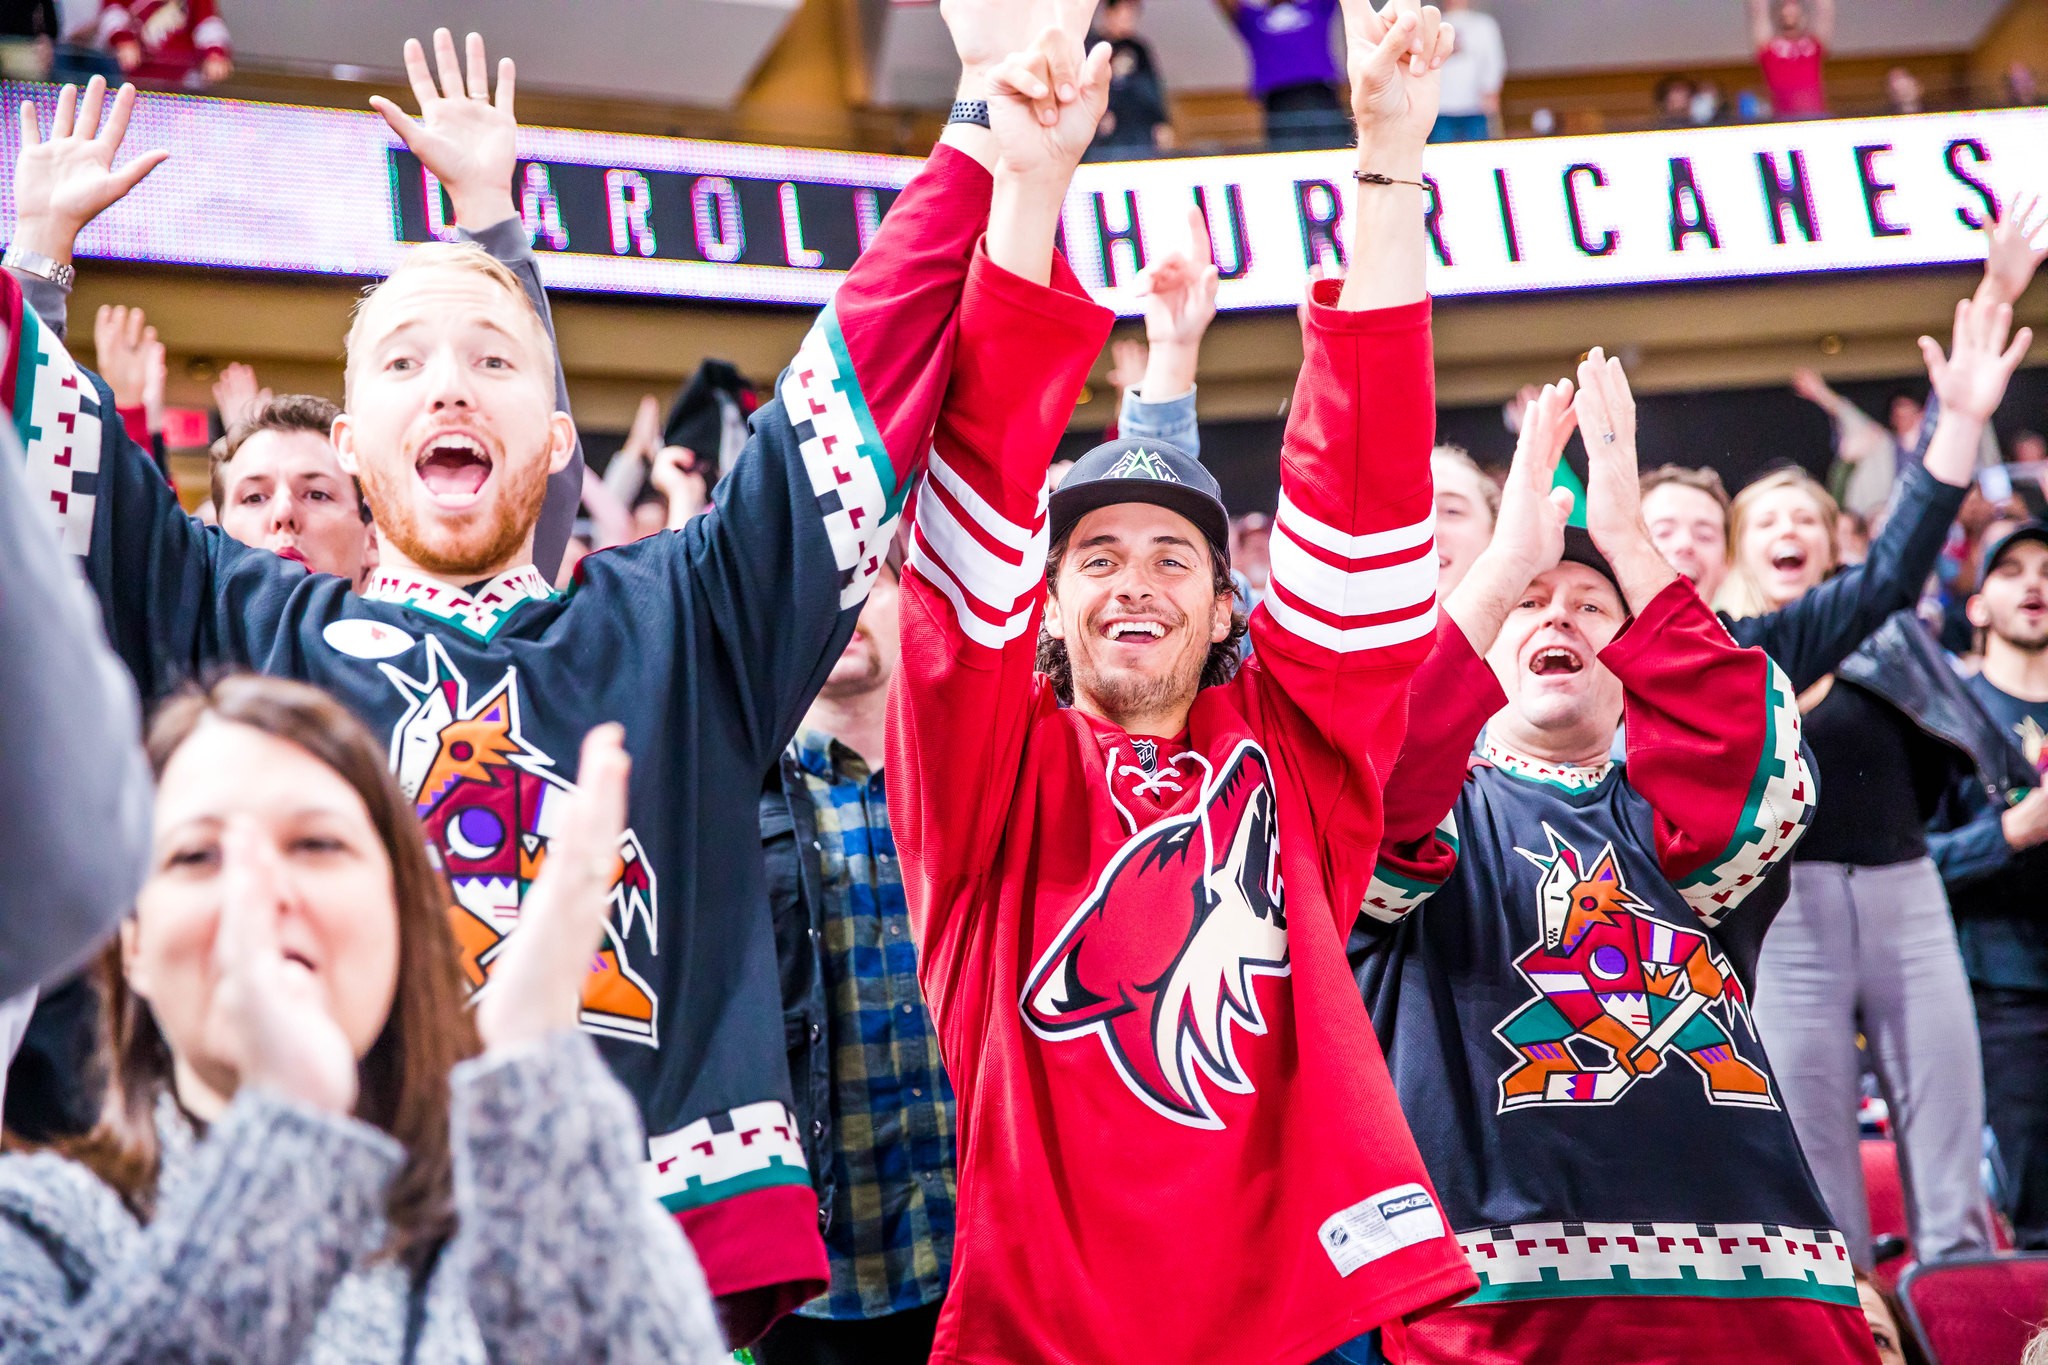 Arizona Coyotes and Cold Beers & Cheeseburgers Introduce New